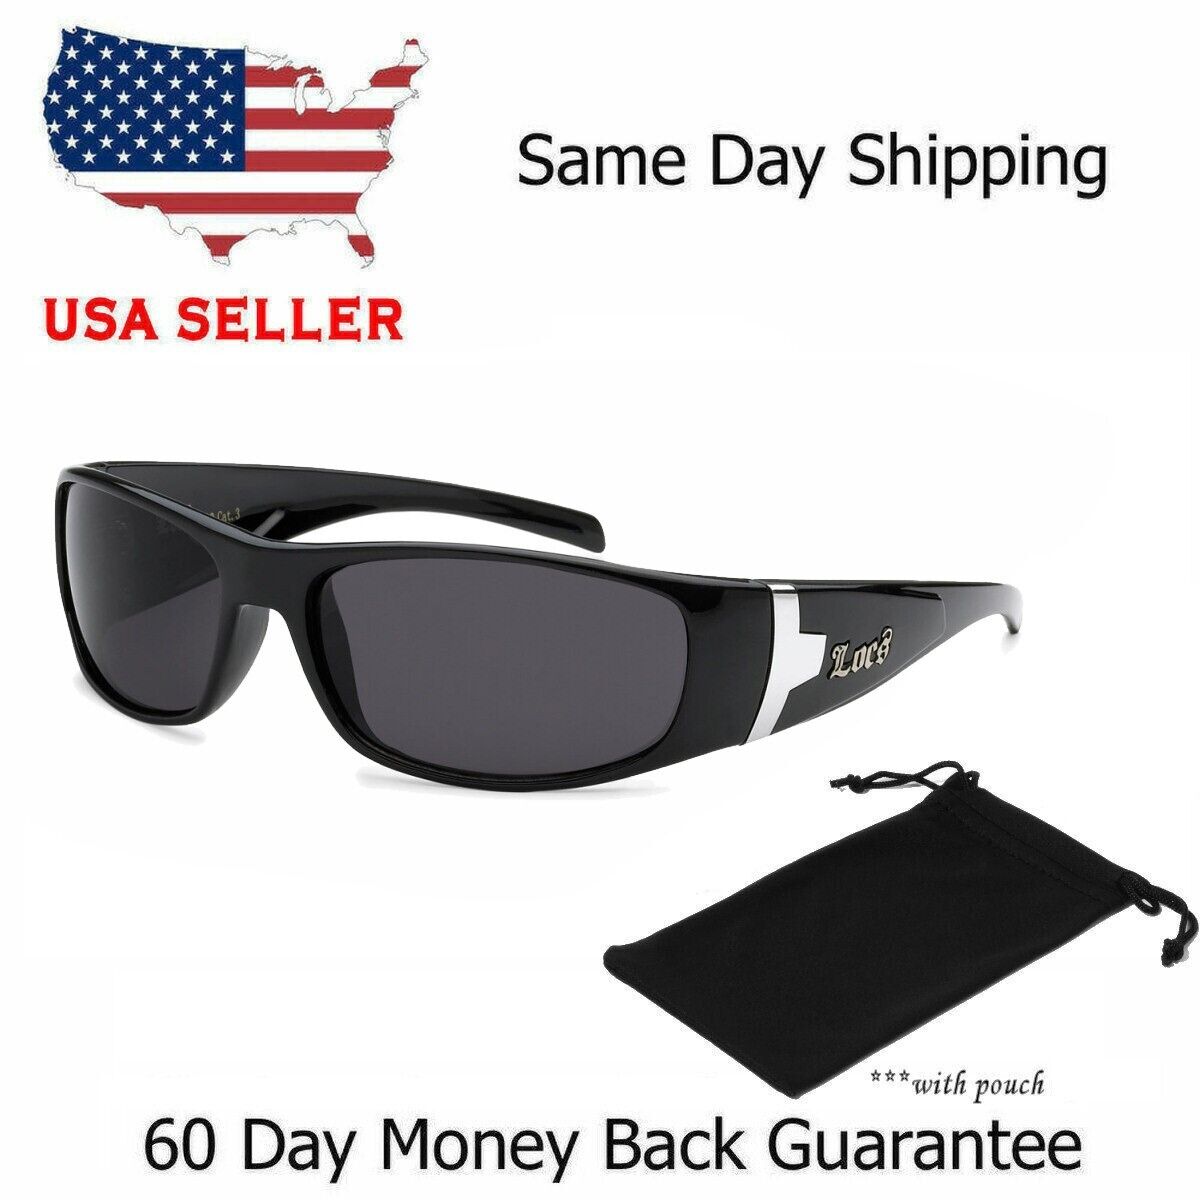 WHOLESALE BULK LOT of LOCS SUNGLASSES 12pc BEST SELLERS  IN THE USA